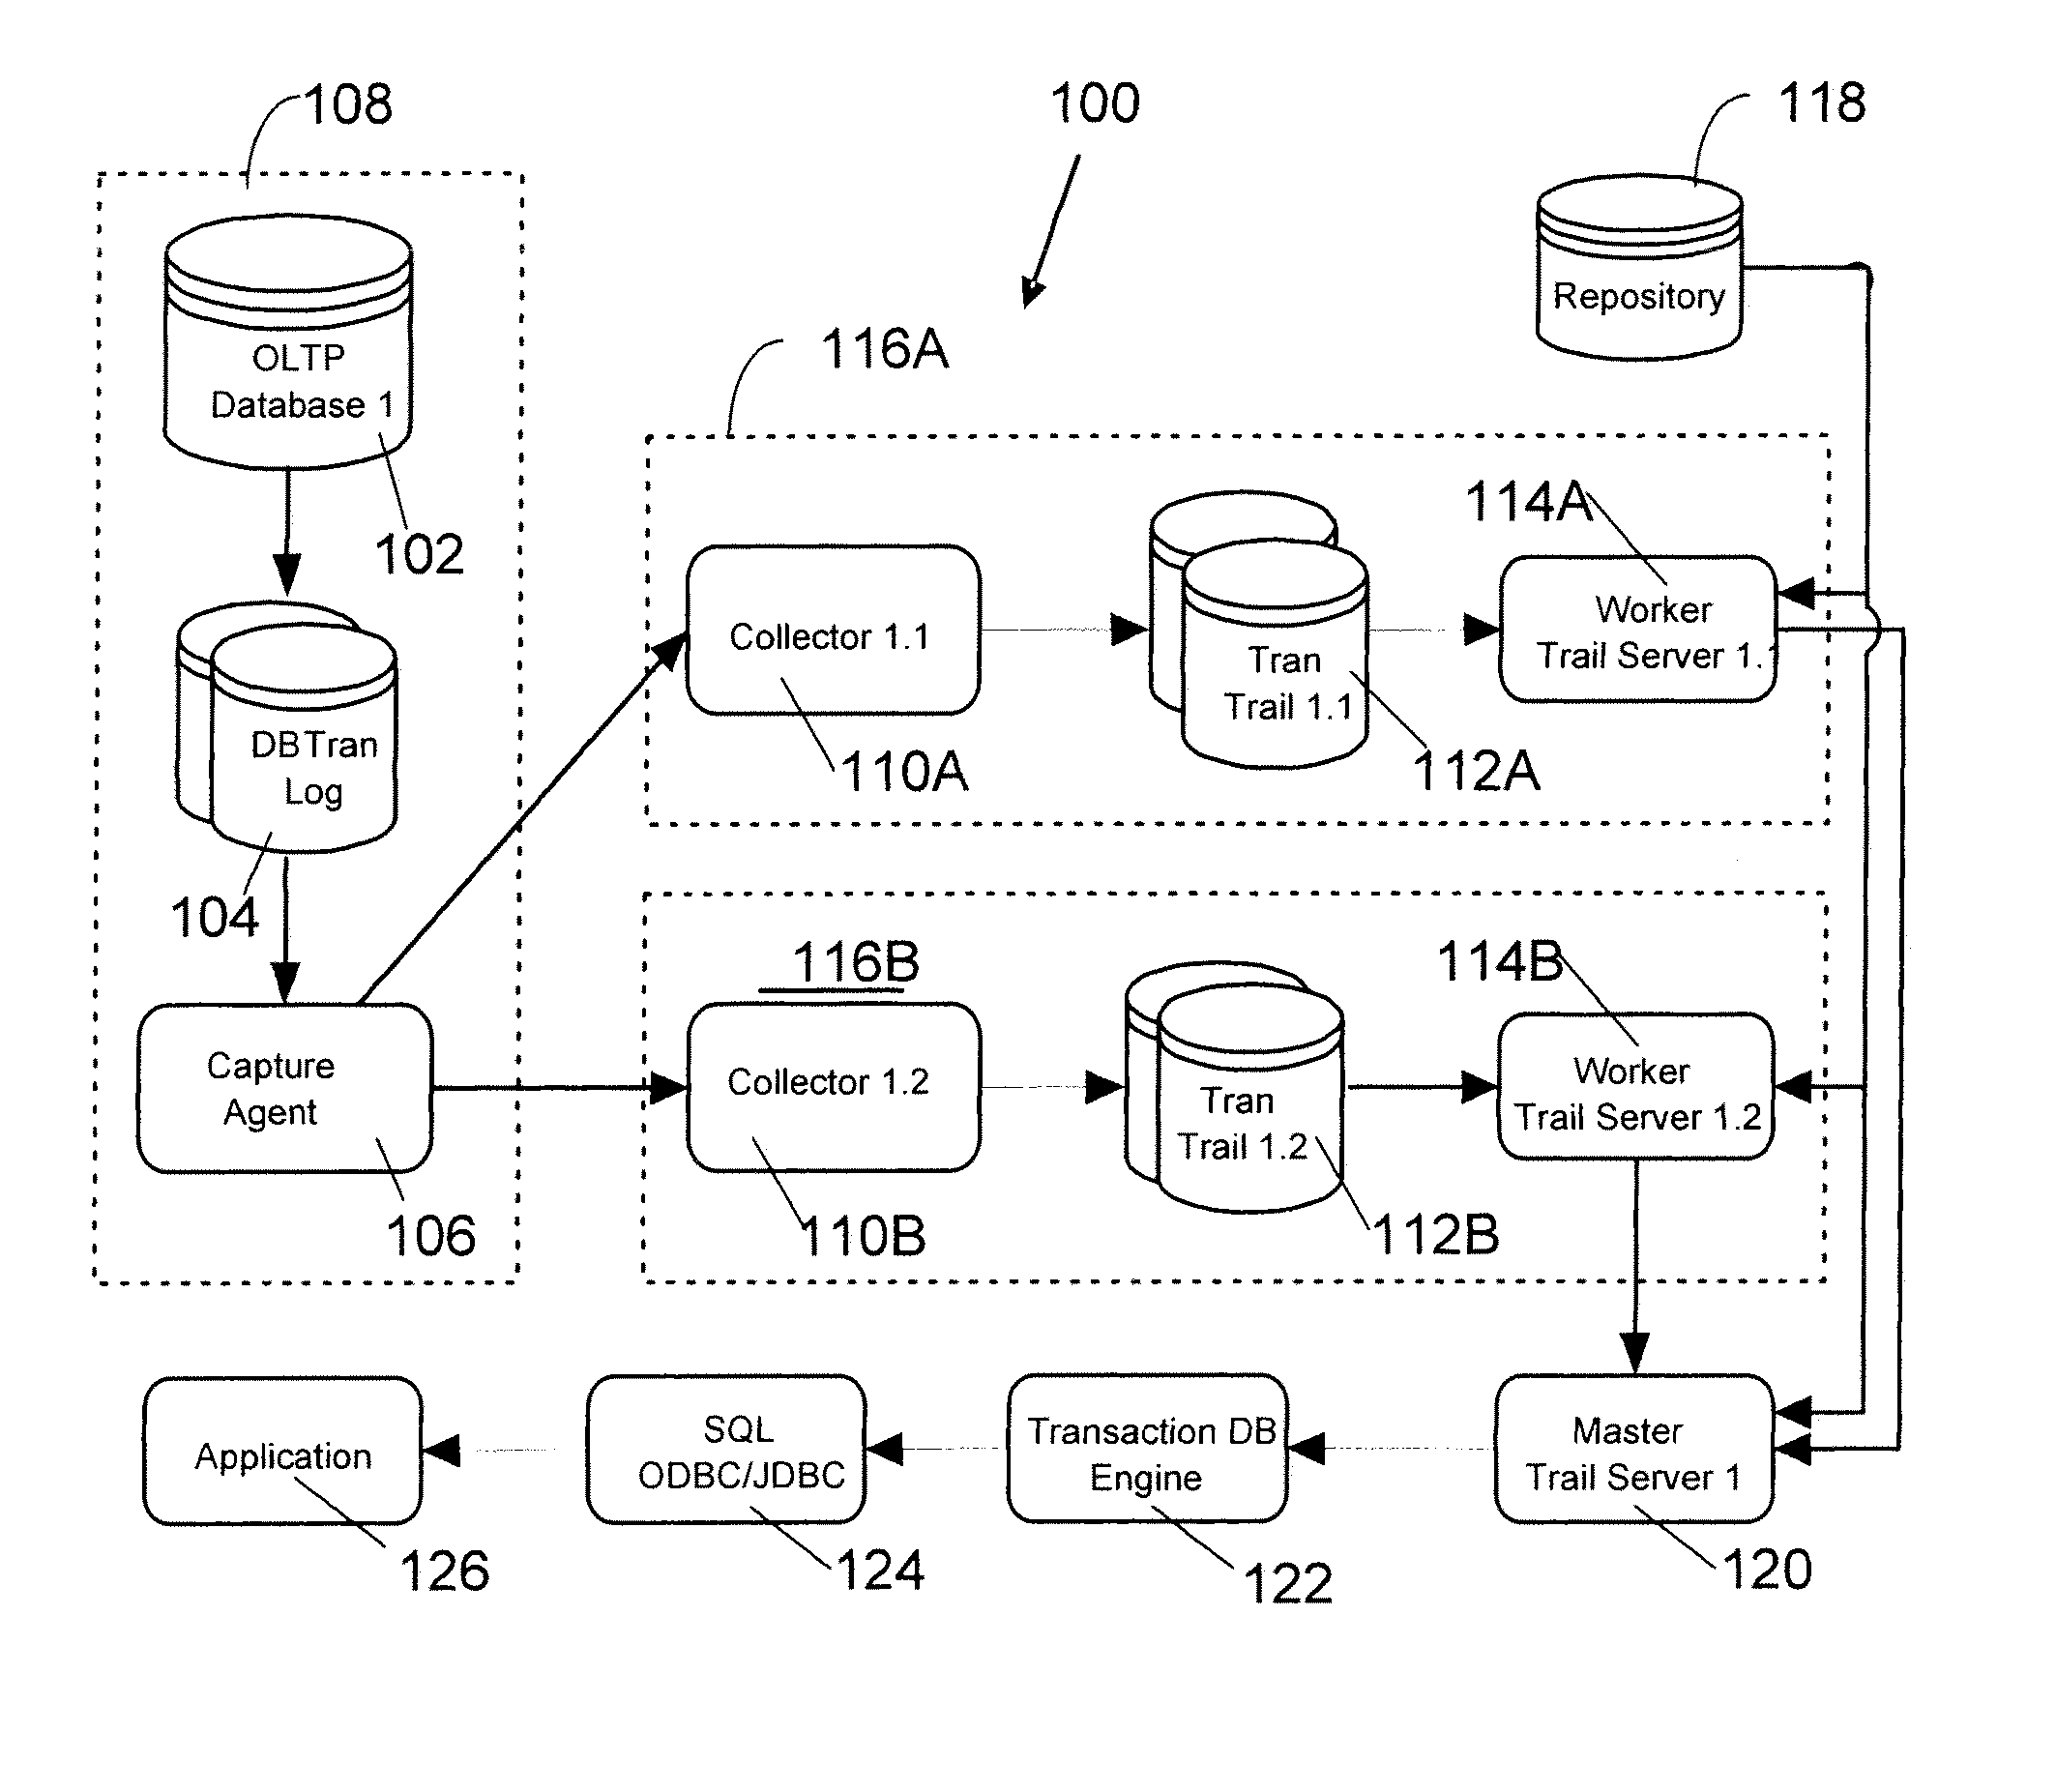 Apparatus and method for forming a homogenous transaction data store from heterogeneous sources